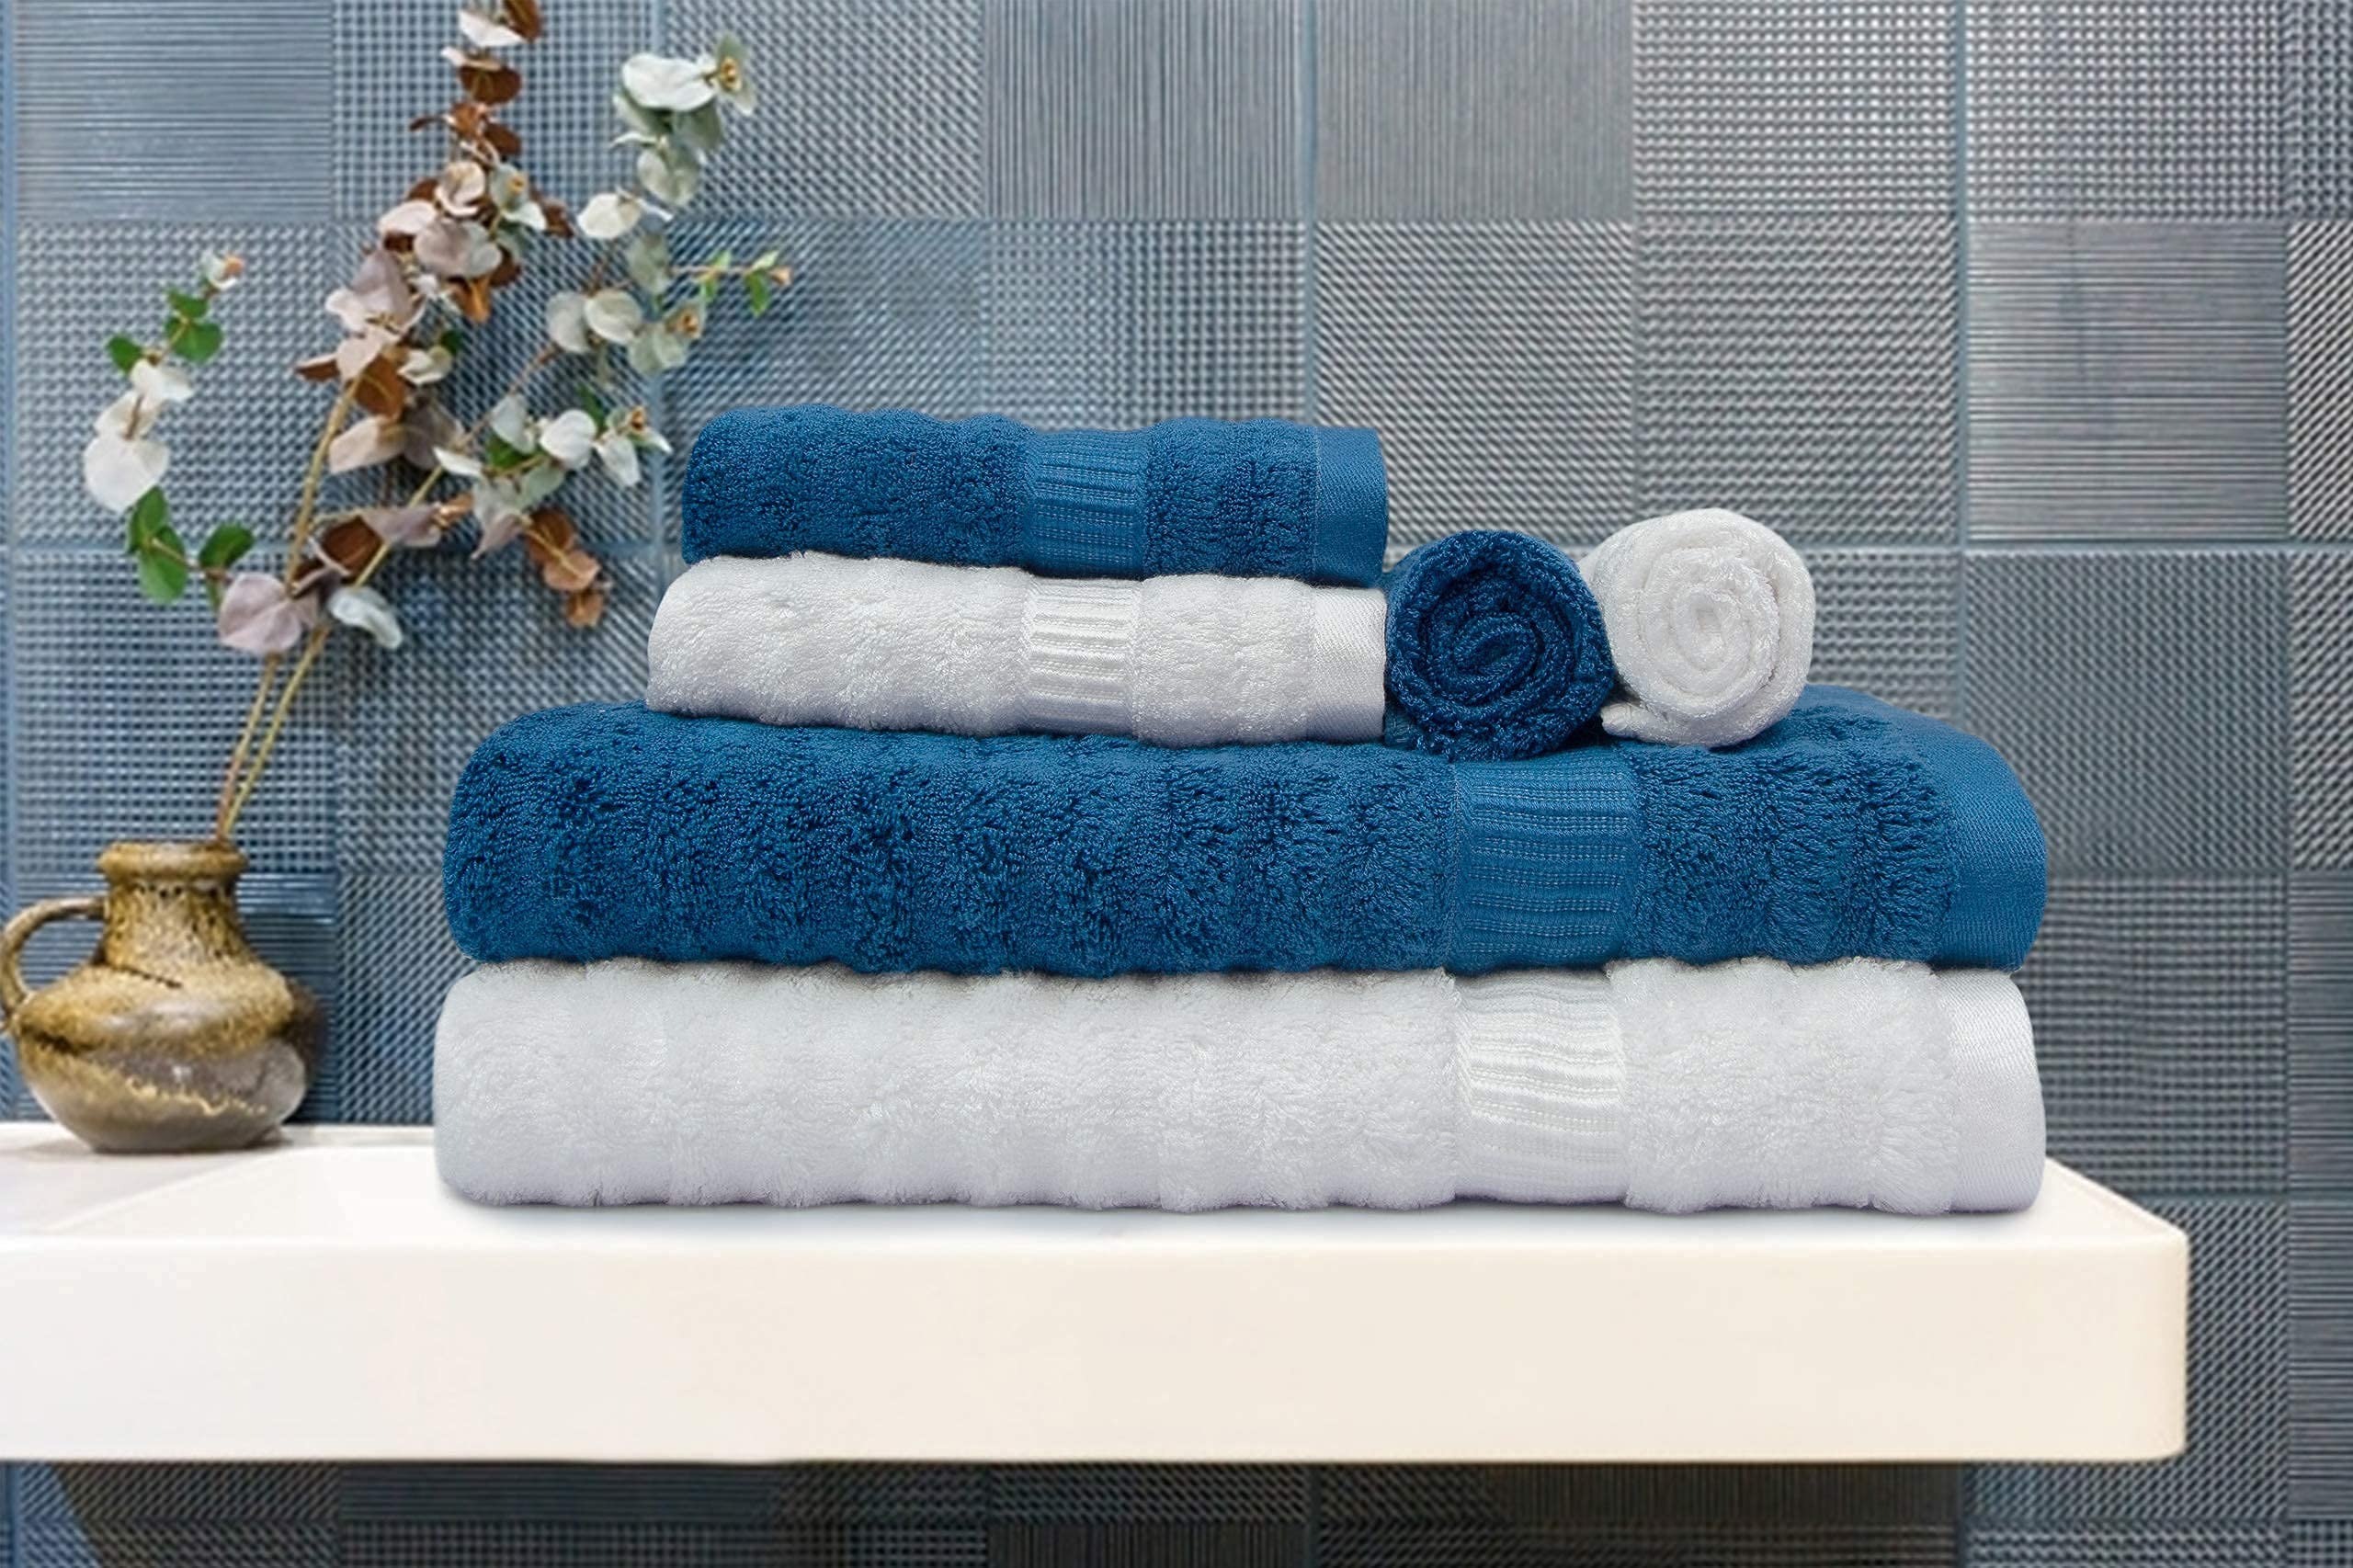 Mush Bamboo Towel: Ultra Soft & Absorbent 600 GSM 6 Piece Couple Set (White & Navy Blue, 2)